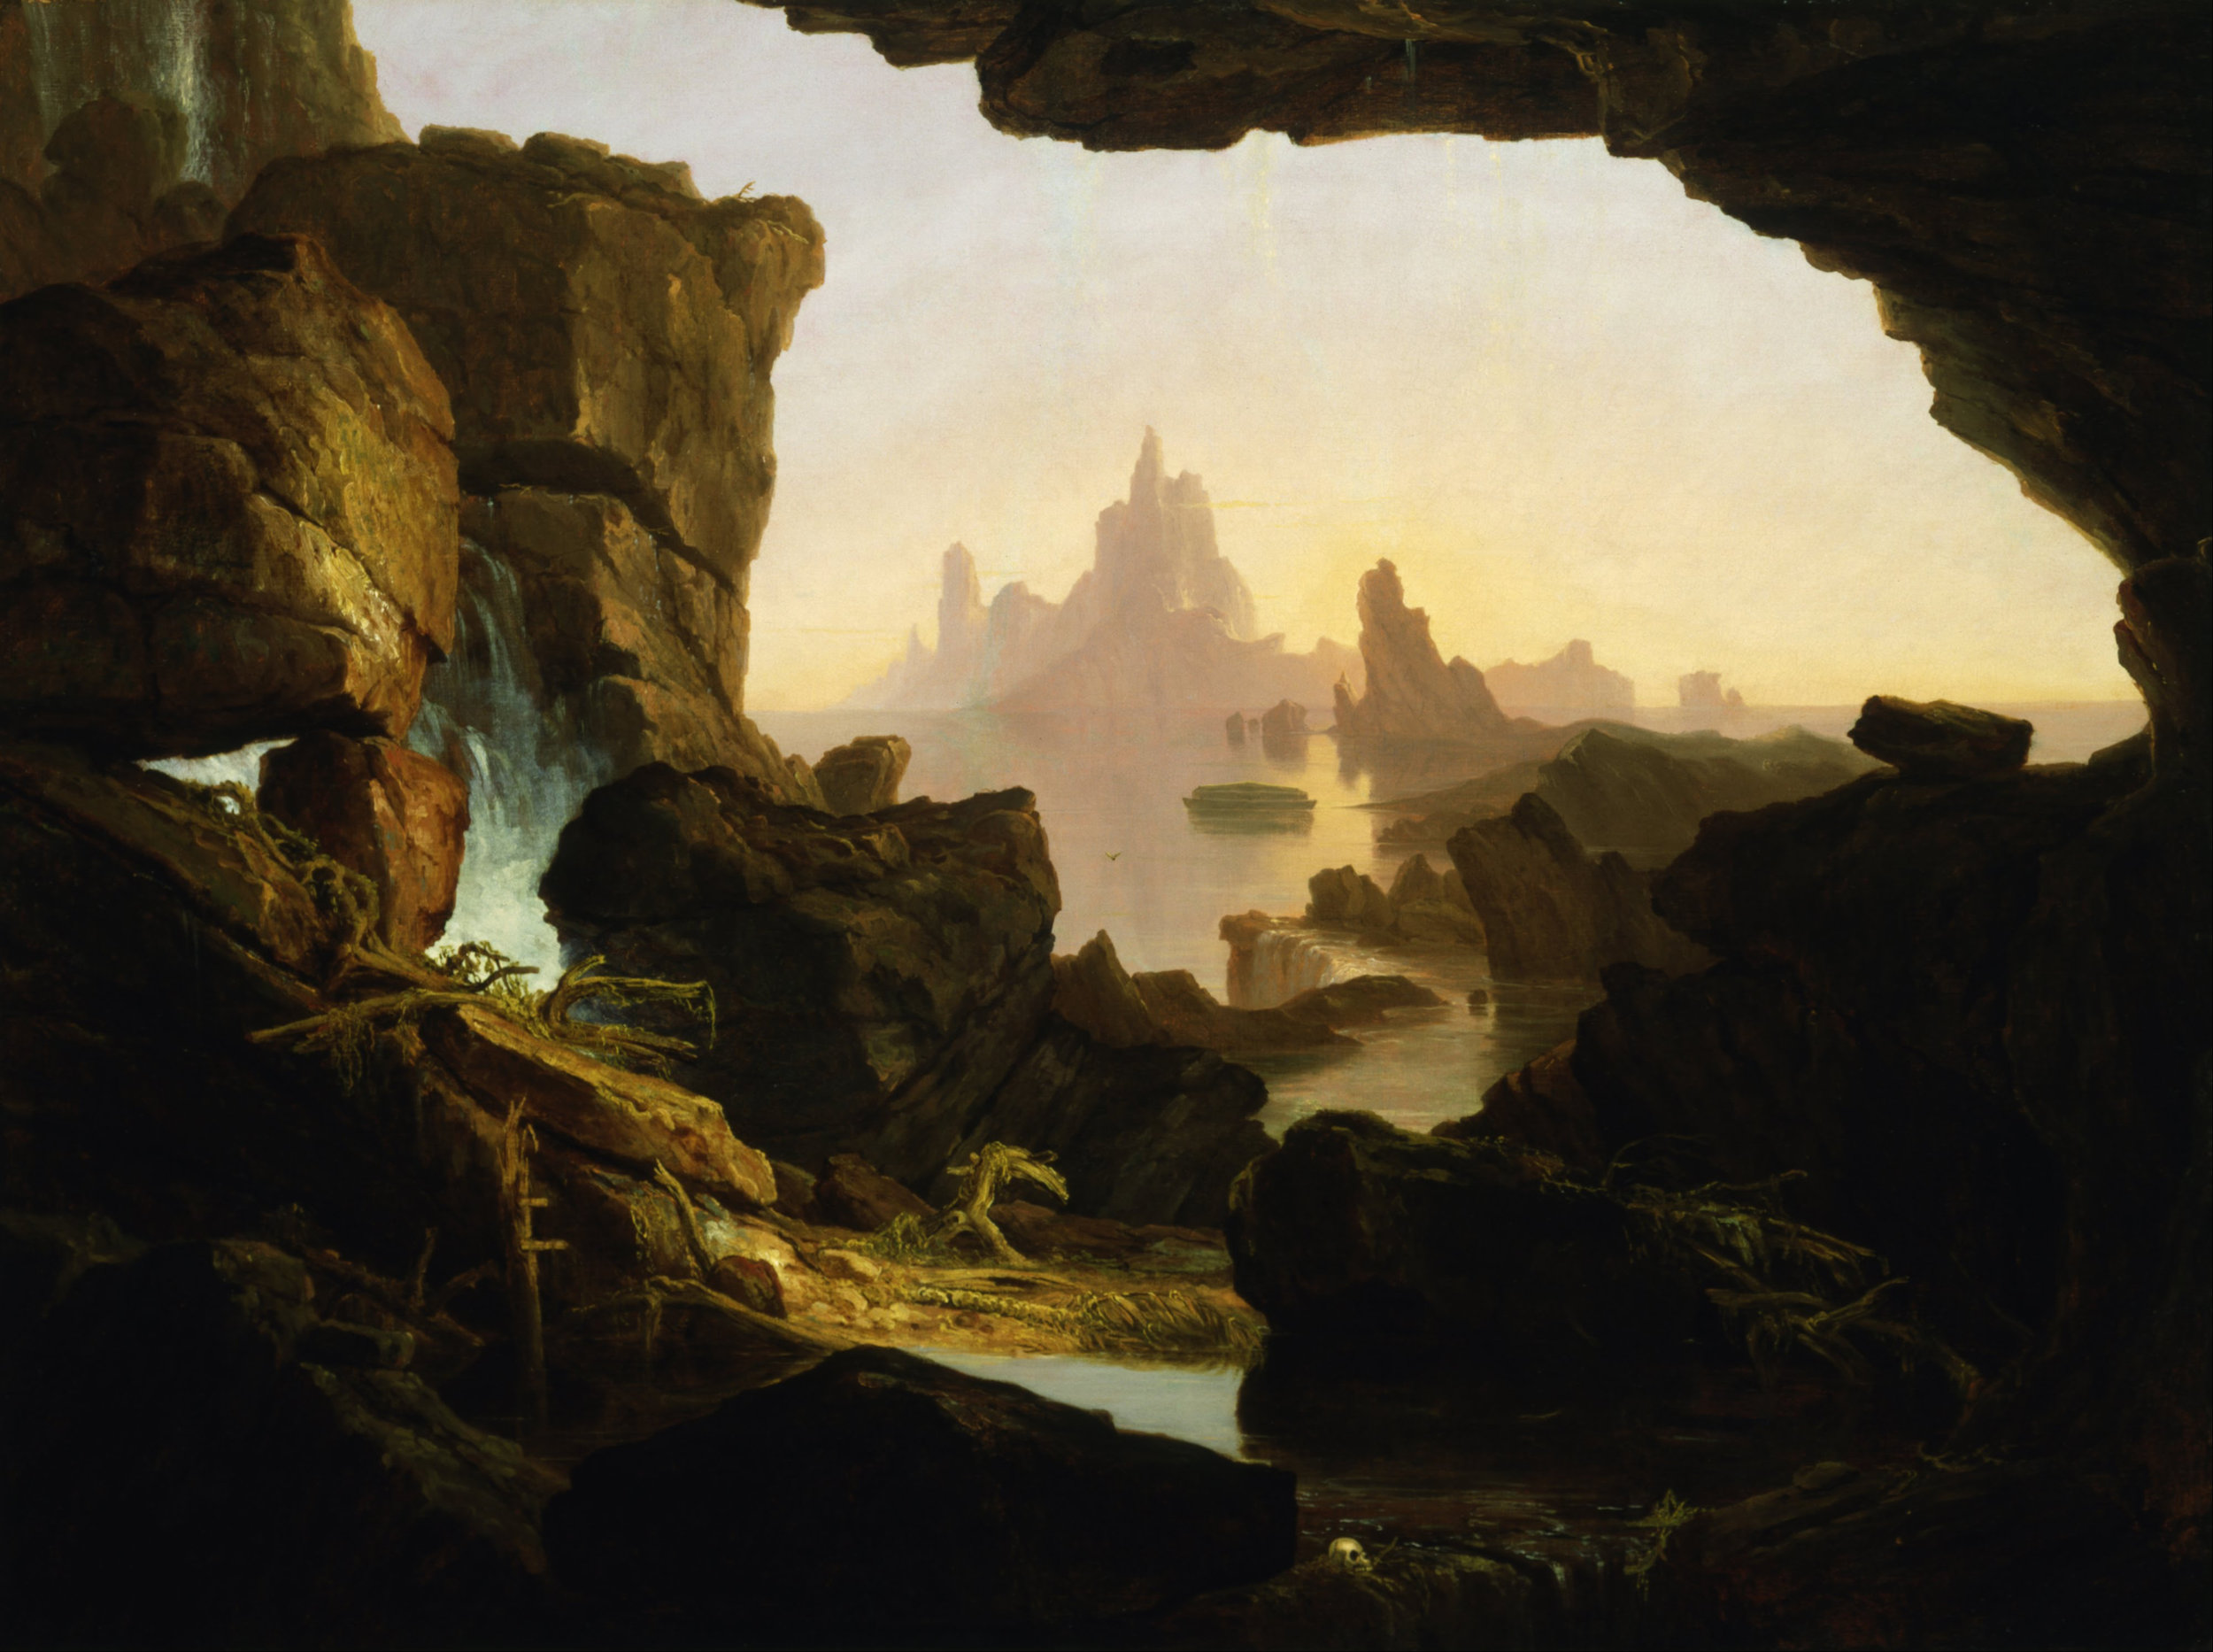 Thomas_Cole_-_The_Subsiding_of_the_Waters_of_the_Deluge_-_Google_Art_Project.jpg